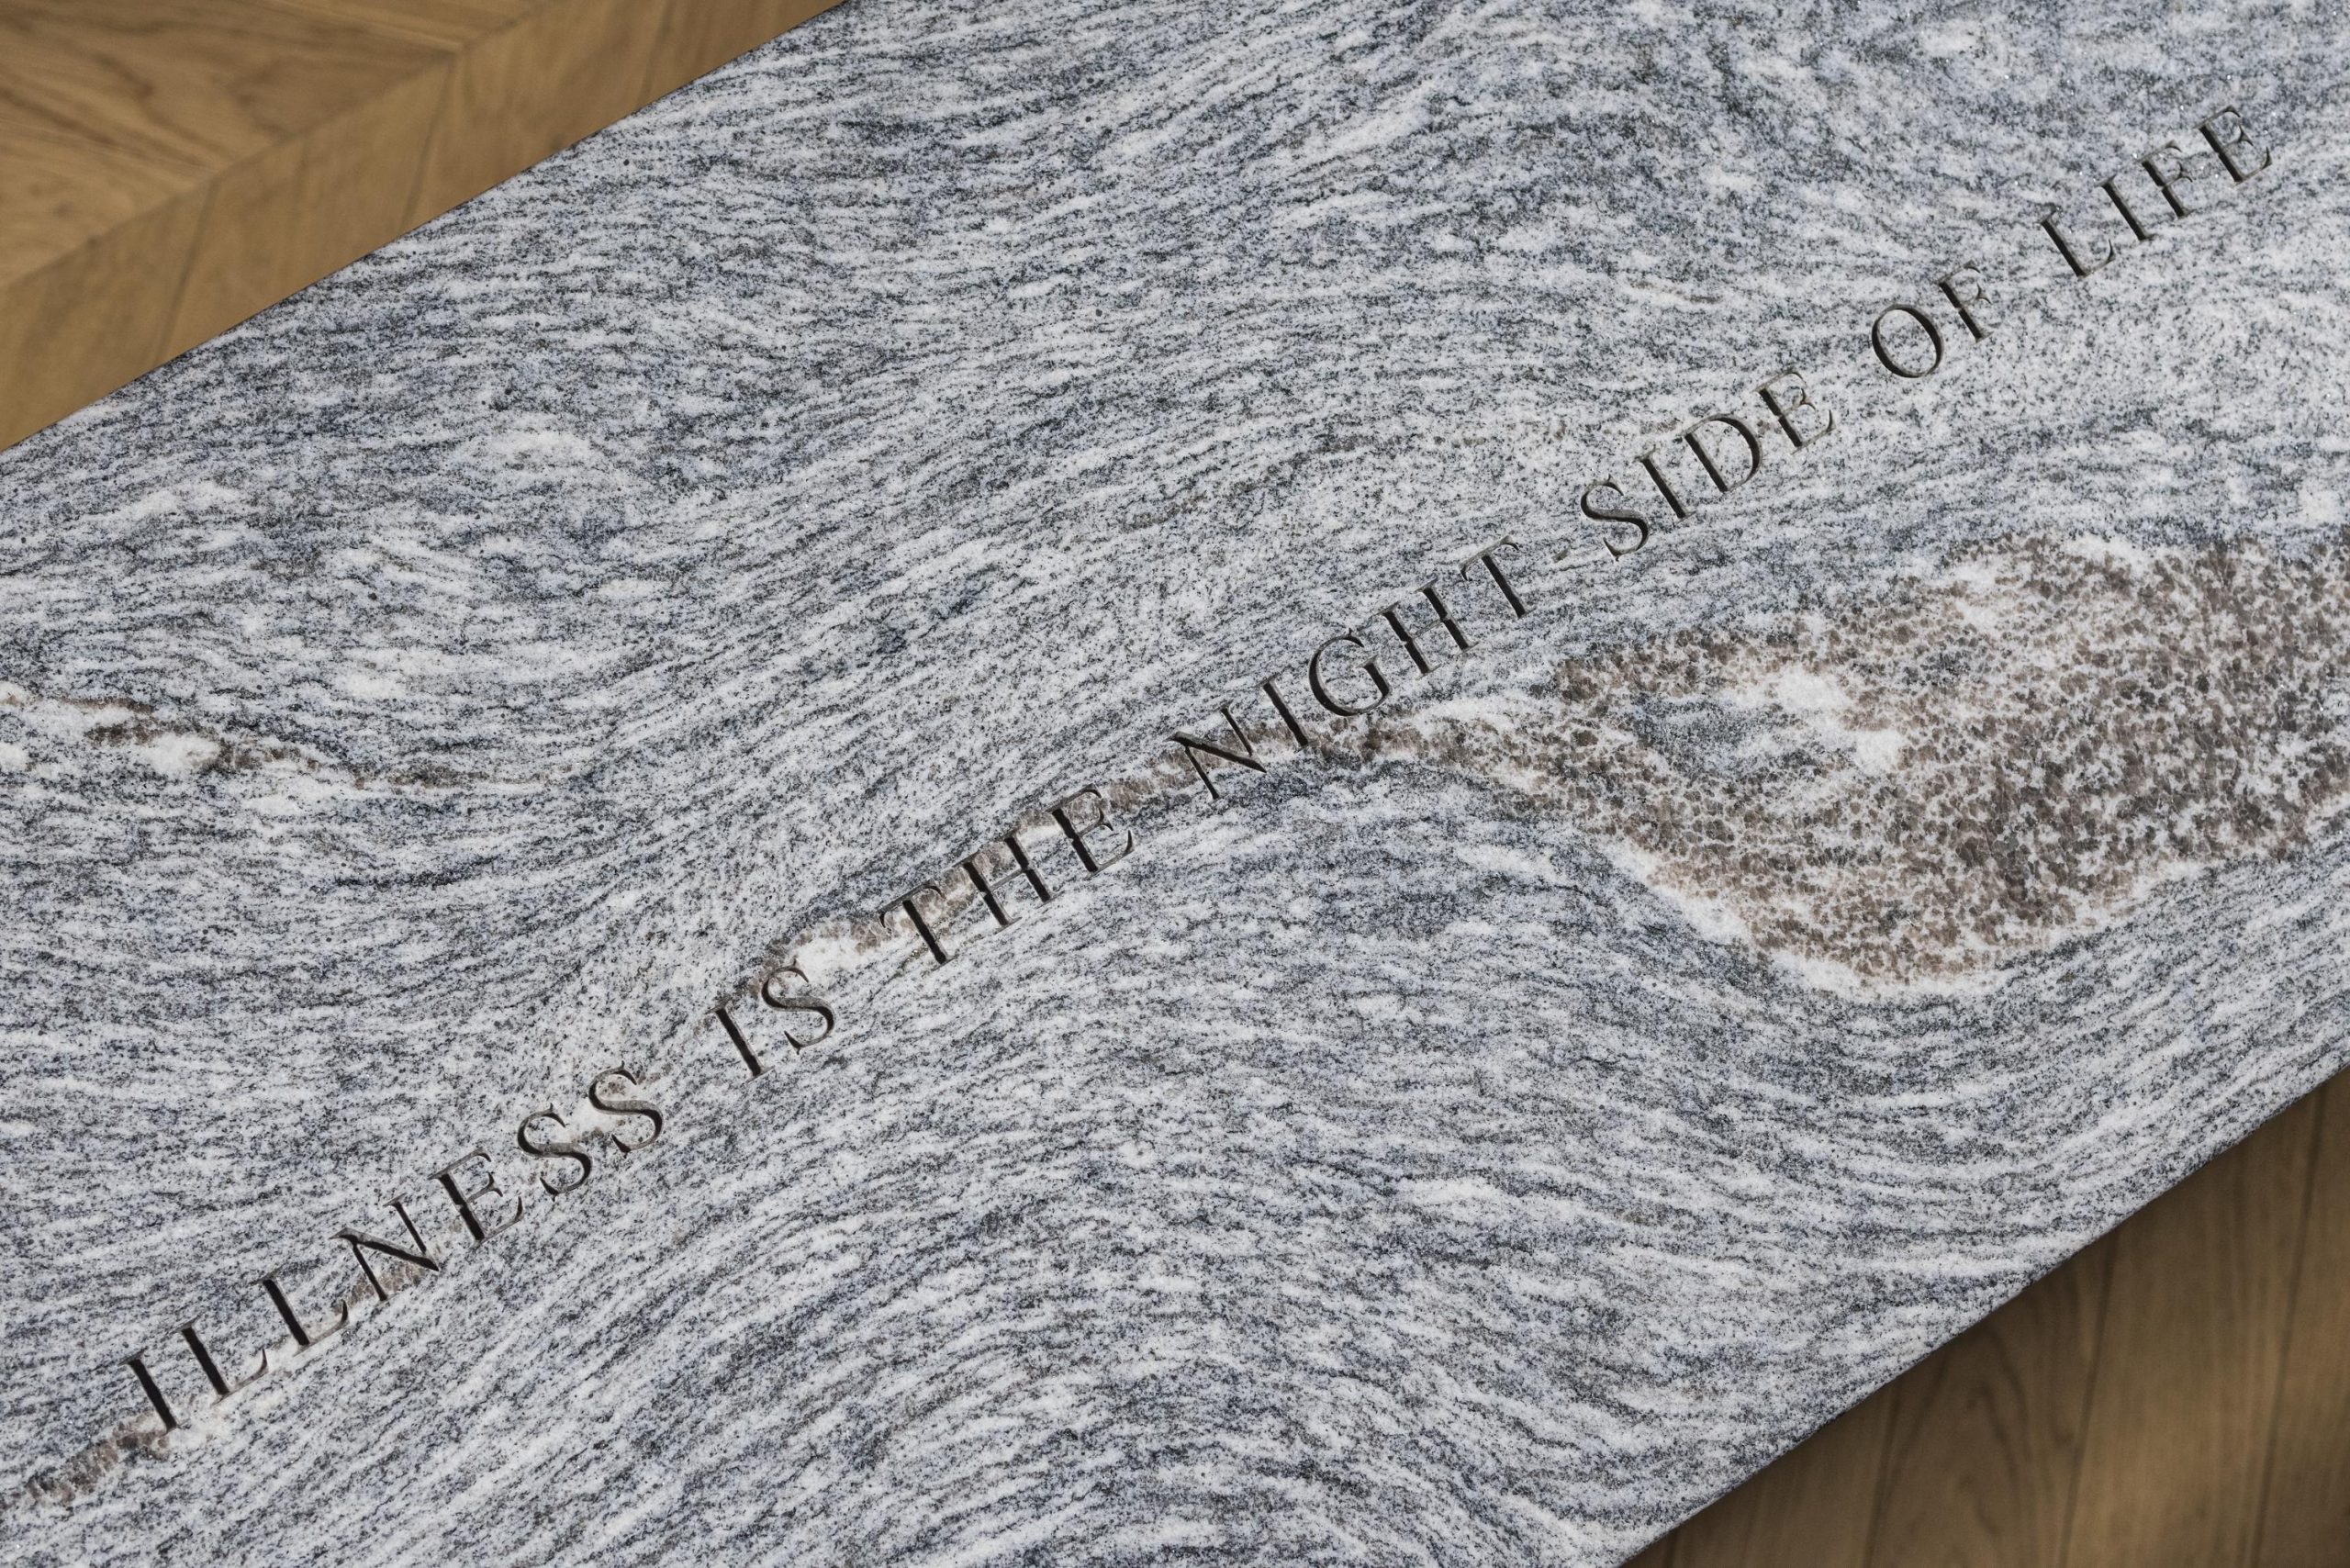 Grey stone bench with "illness is the night side of life" engraved on the top